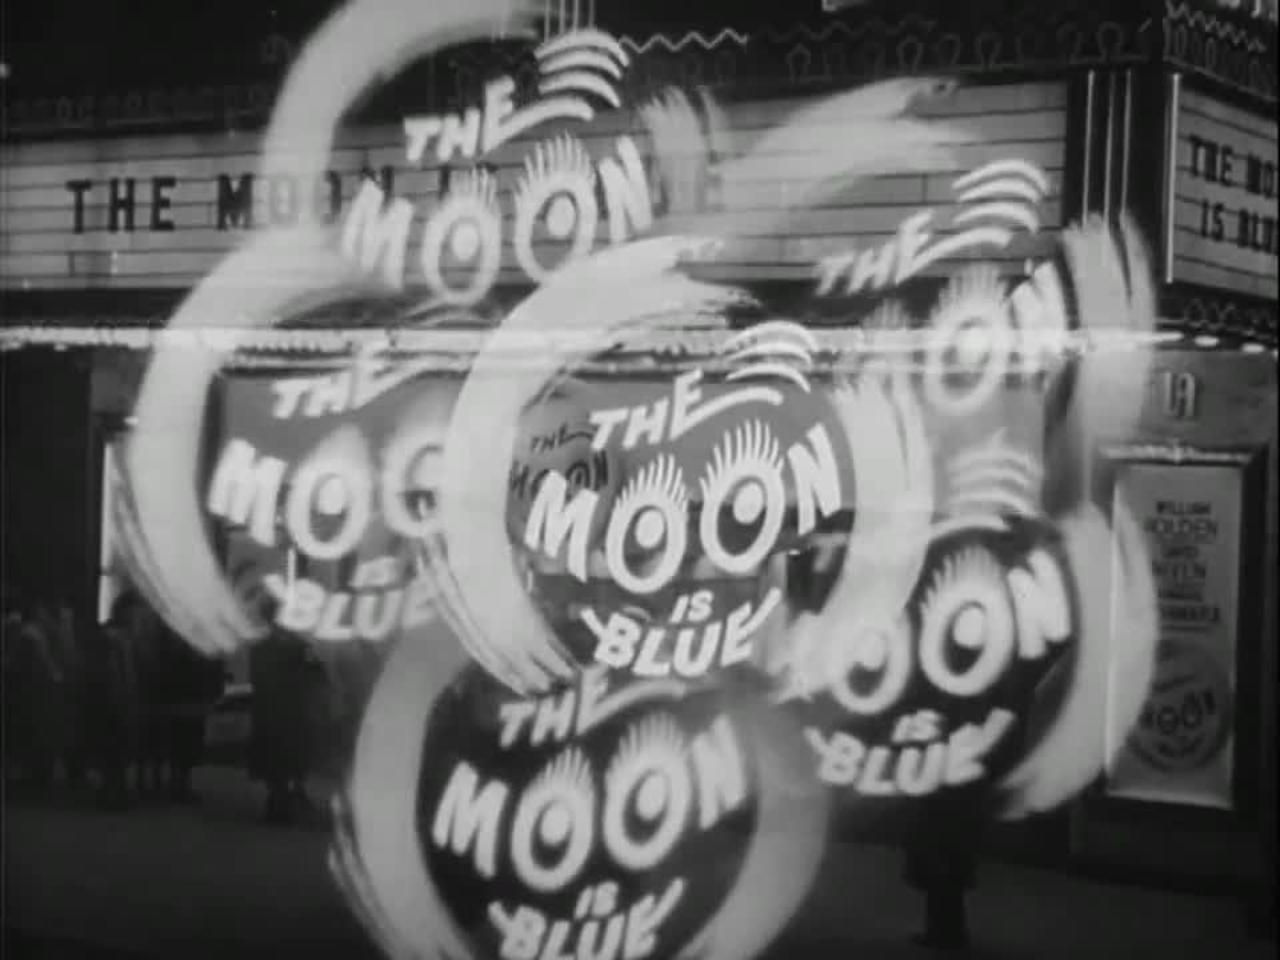 The Moon Is Blue // 1953 American romantic comedy film trailer